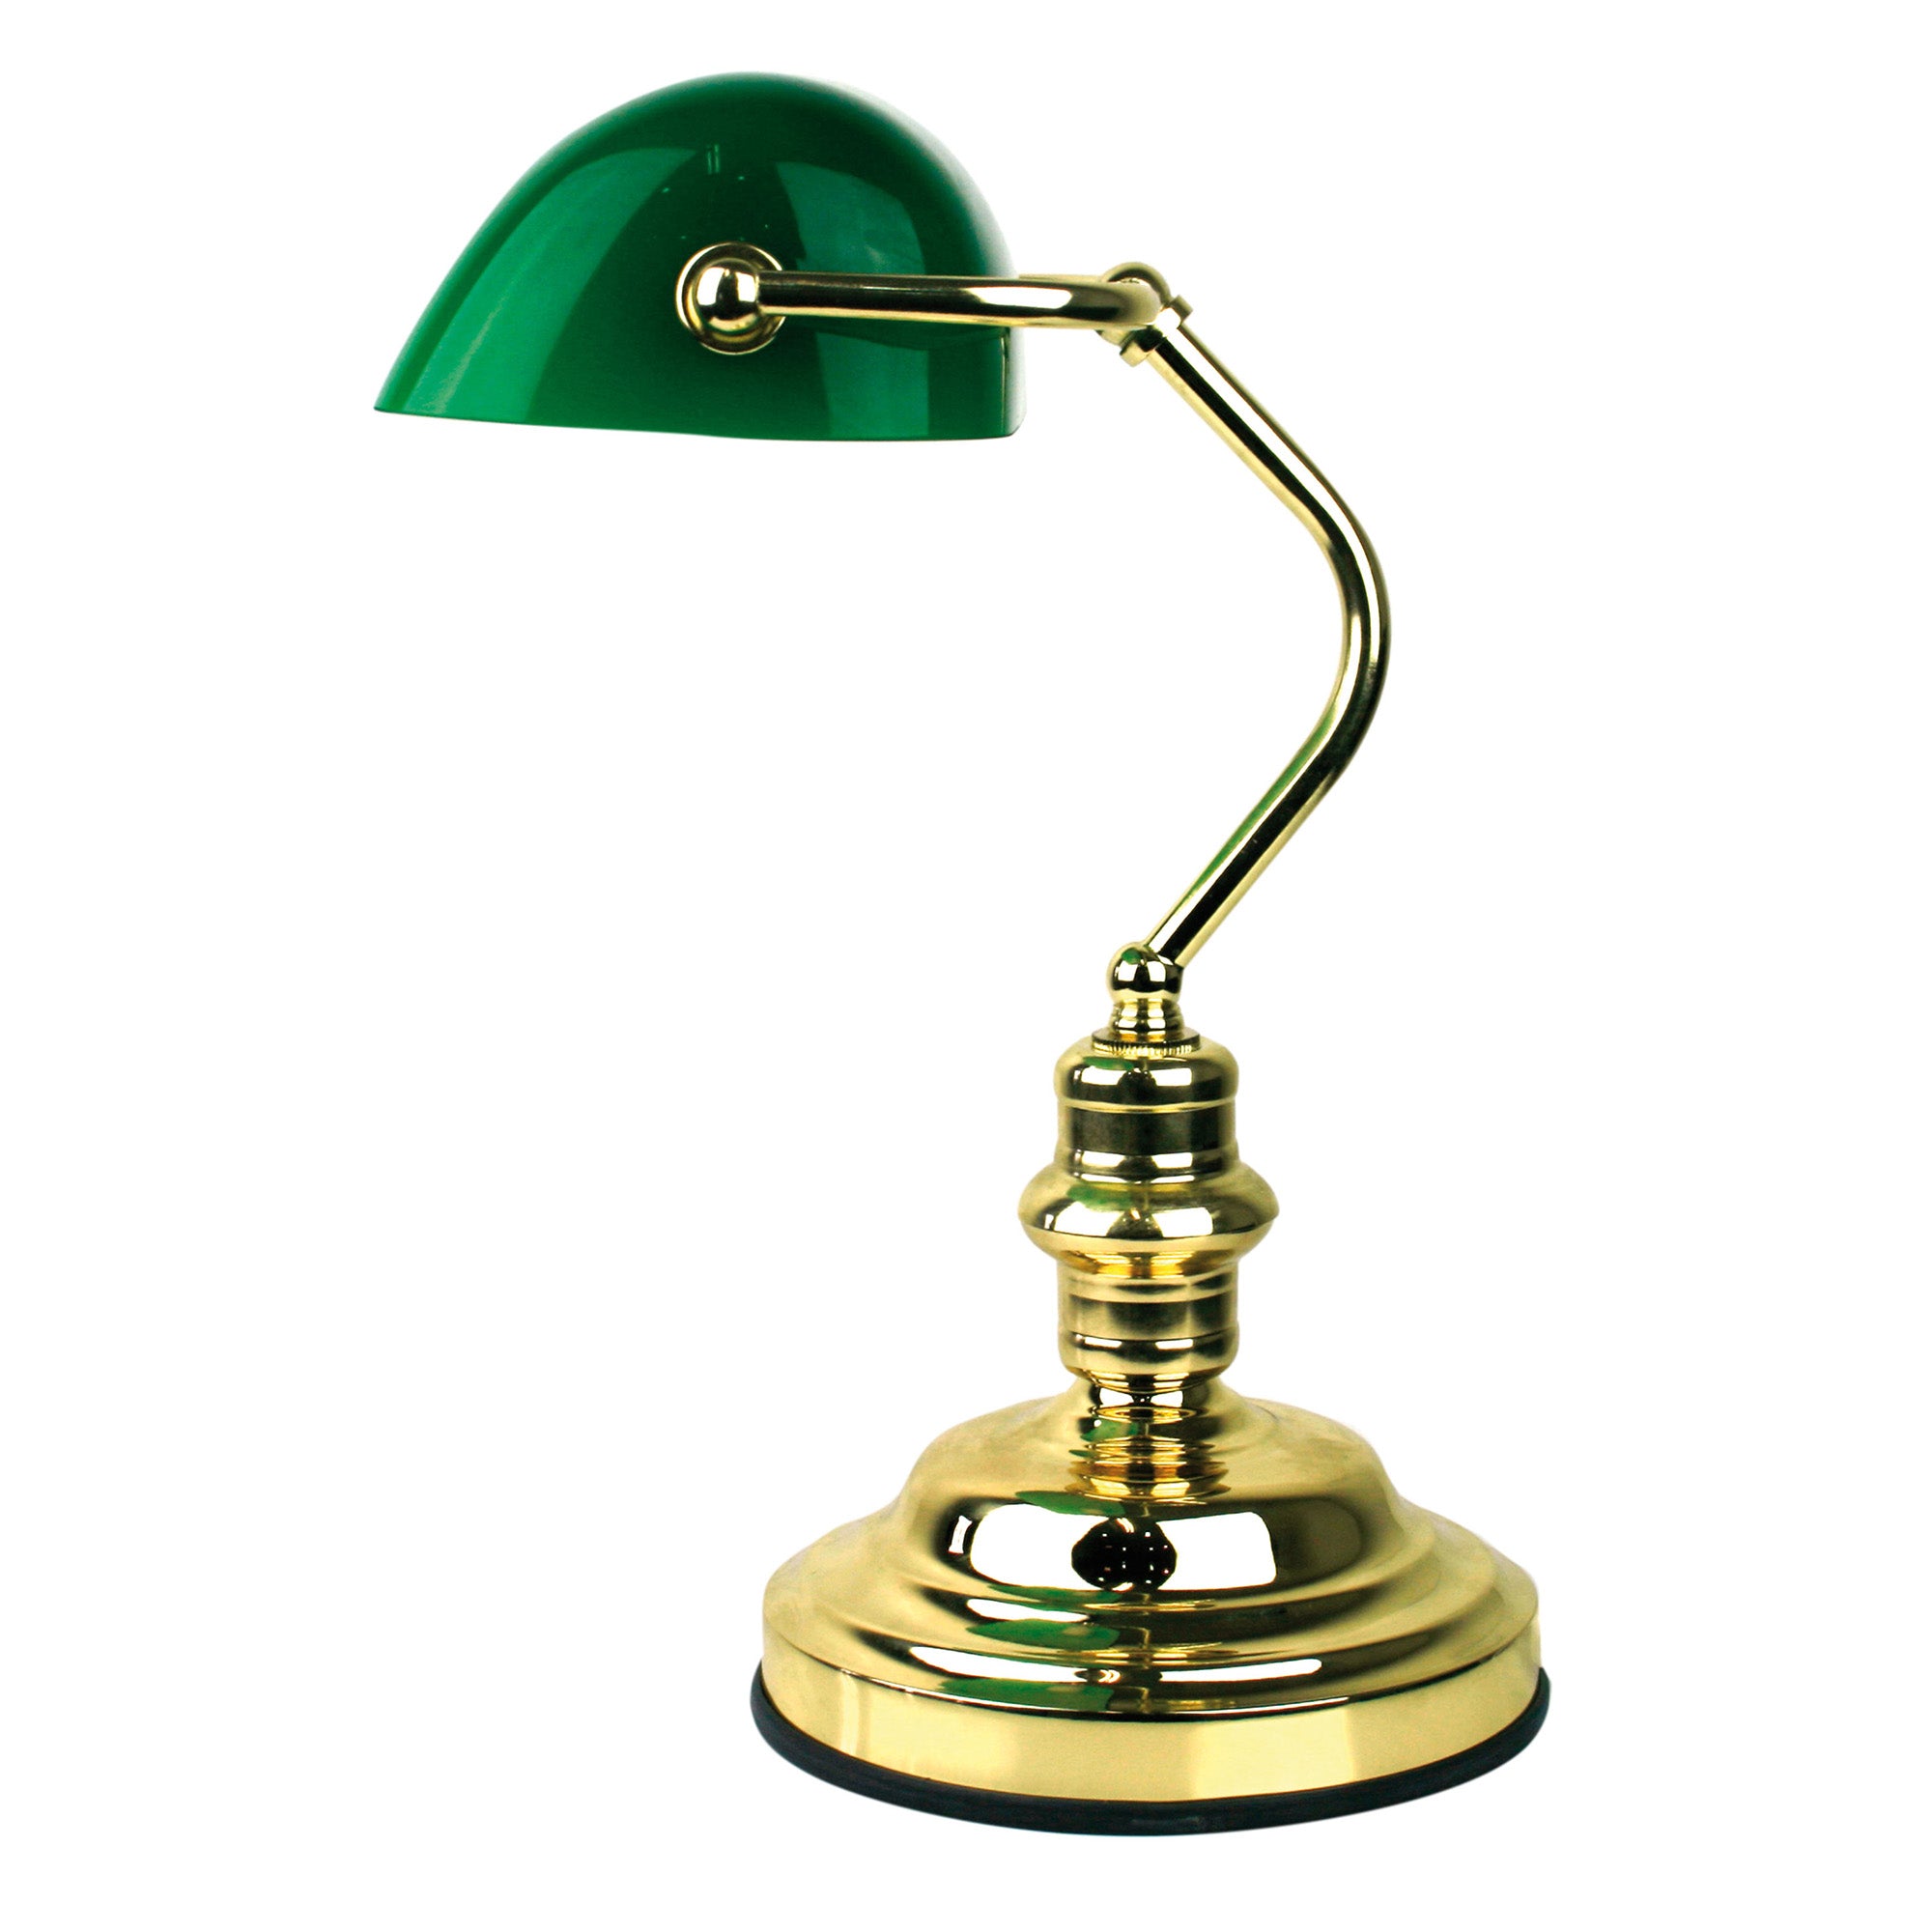 Executive 3 Stage Touch Lamp in Polished Brass or Antique Brass